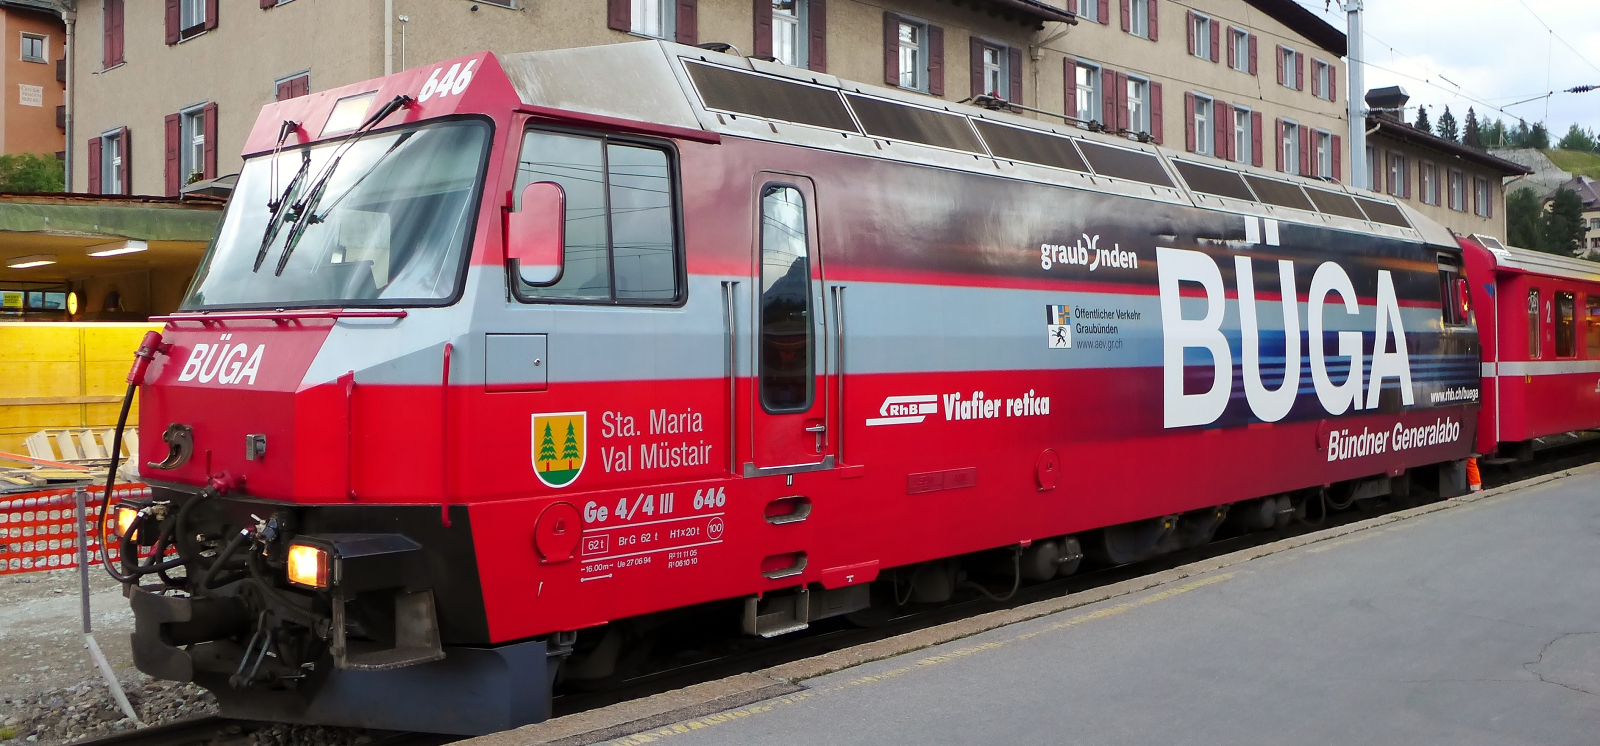 No. 646 “Sta. Maria Val Müstair” in July 2014 in St. Moritz